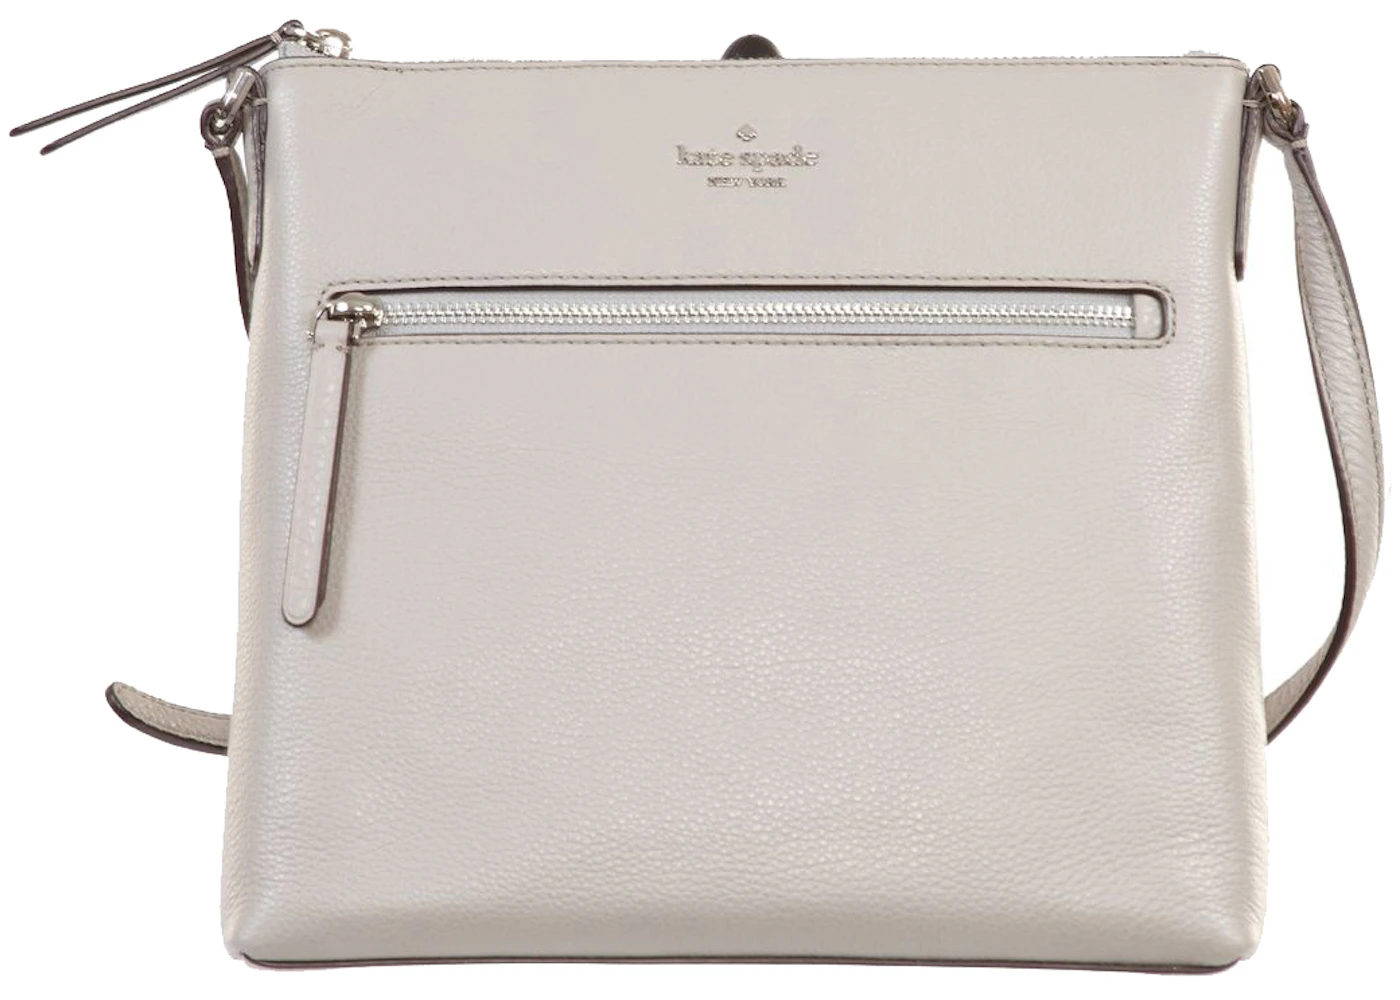 Kate Spade Jackson Top Zip Crossbody Bag Soft Taupe in Leather